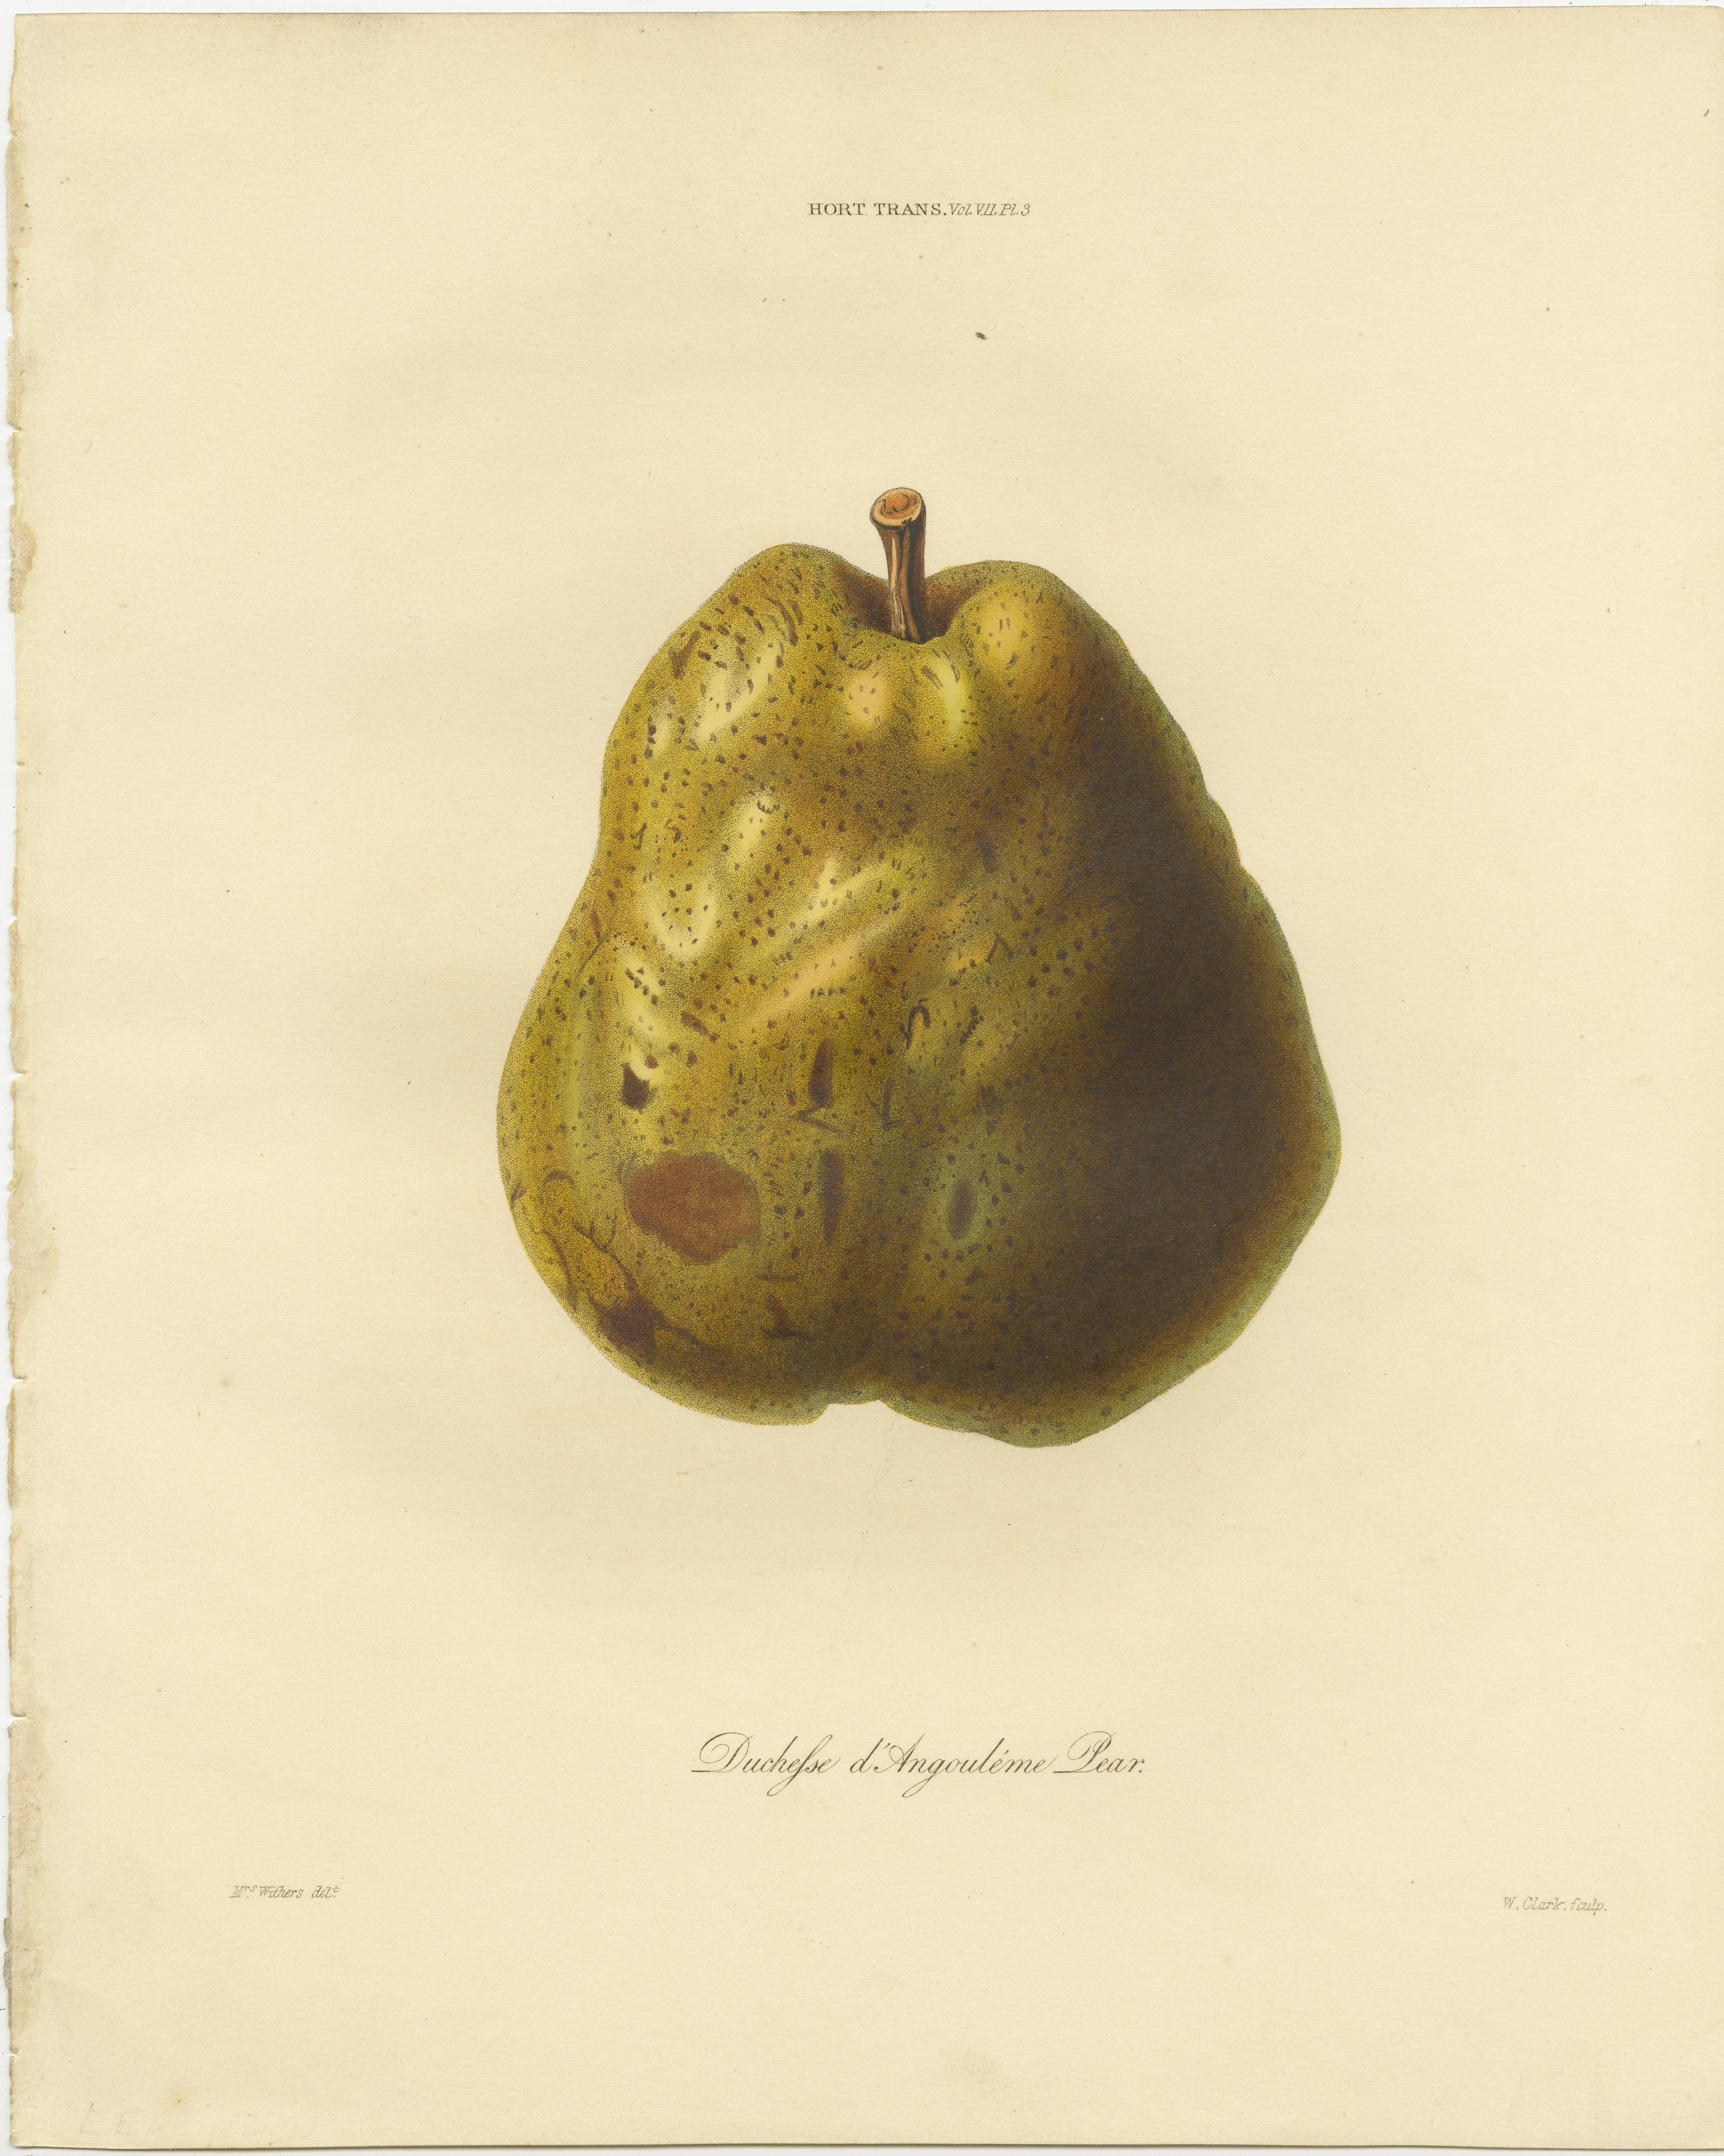 Set of 2 antique prints of pears. It shows the Beurrée d'Aremberg Pear, Gloux Morceaux Pear and the Duchesse d'Angouléme Pear. These prints originate from 'Transactions of the Horticultural Society of London' published circa 1835.

In Transactions